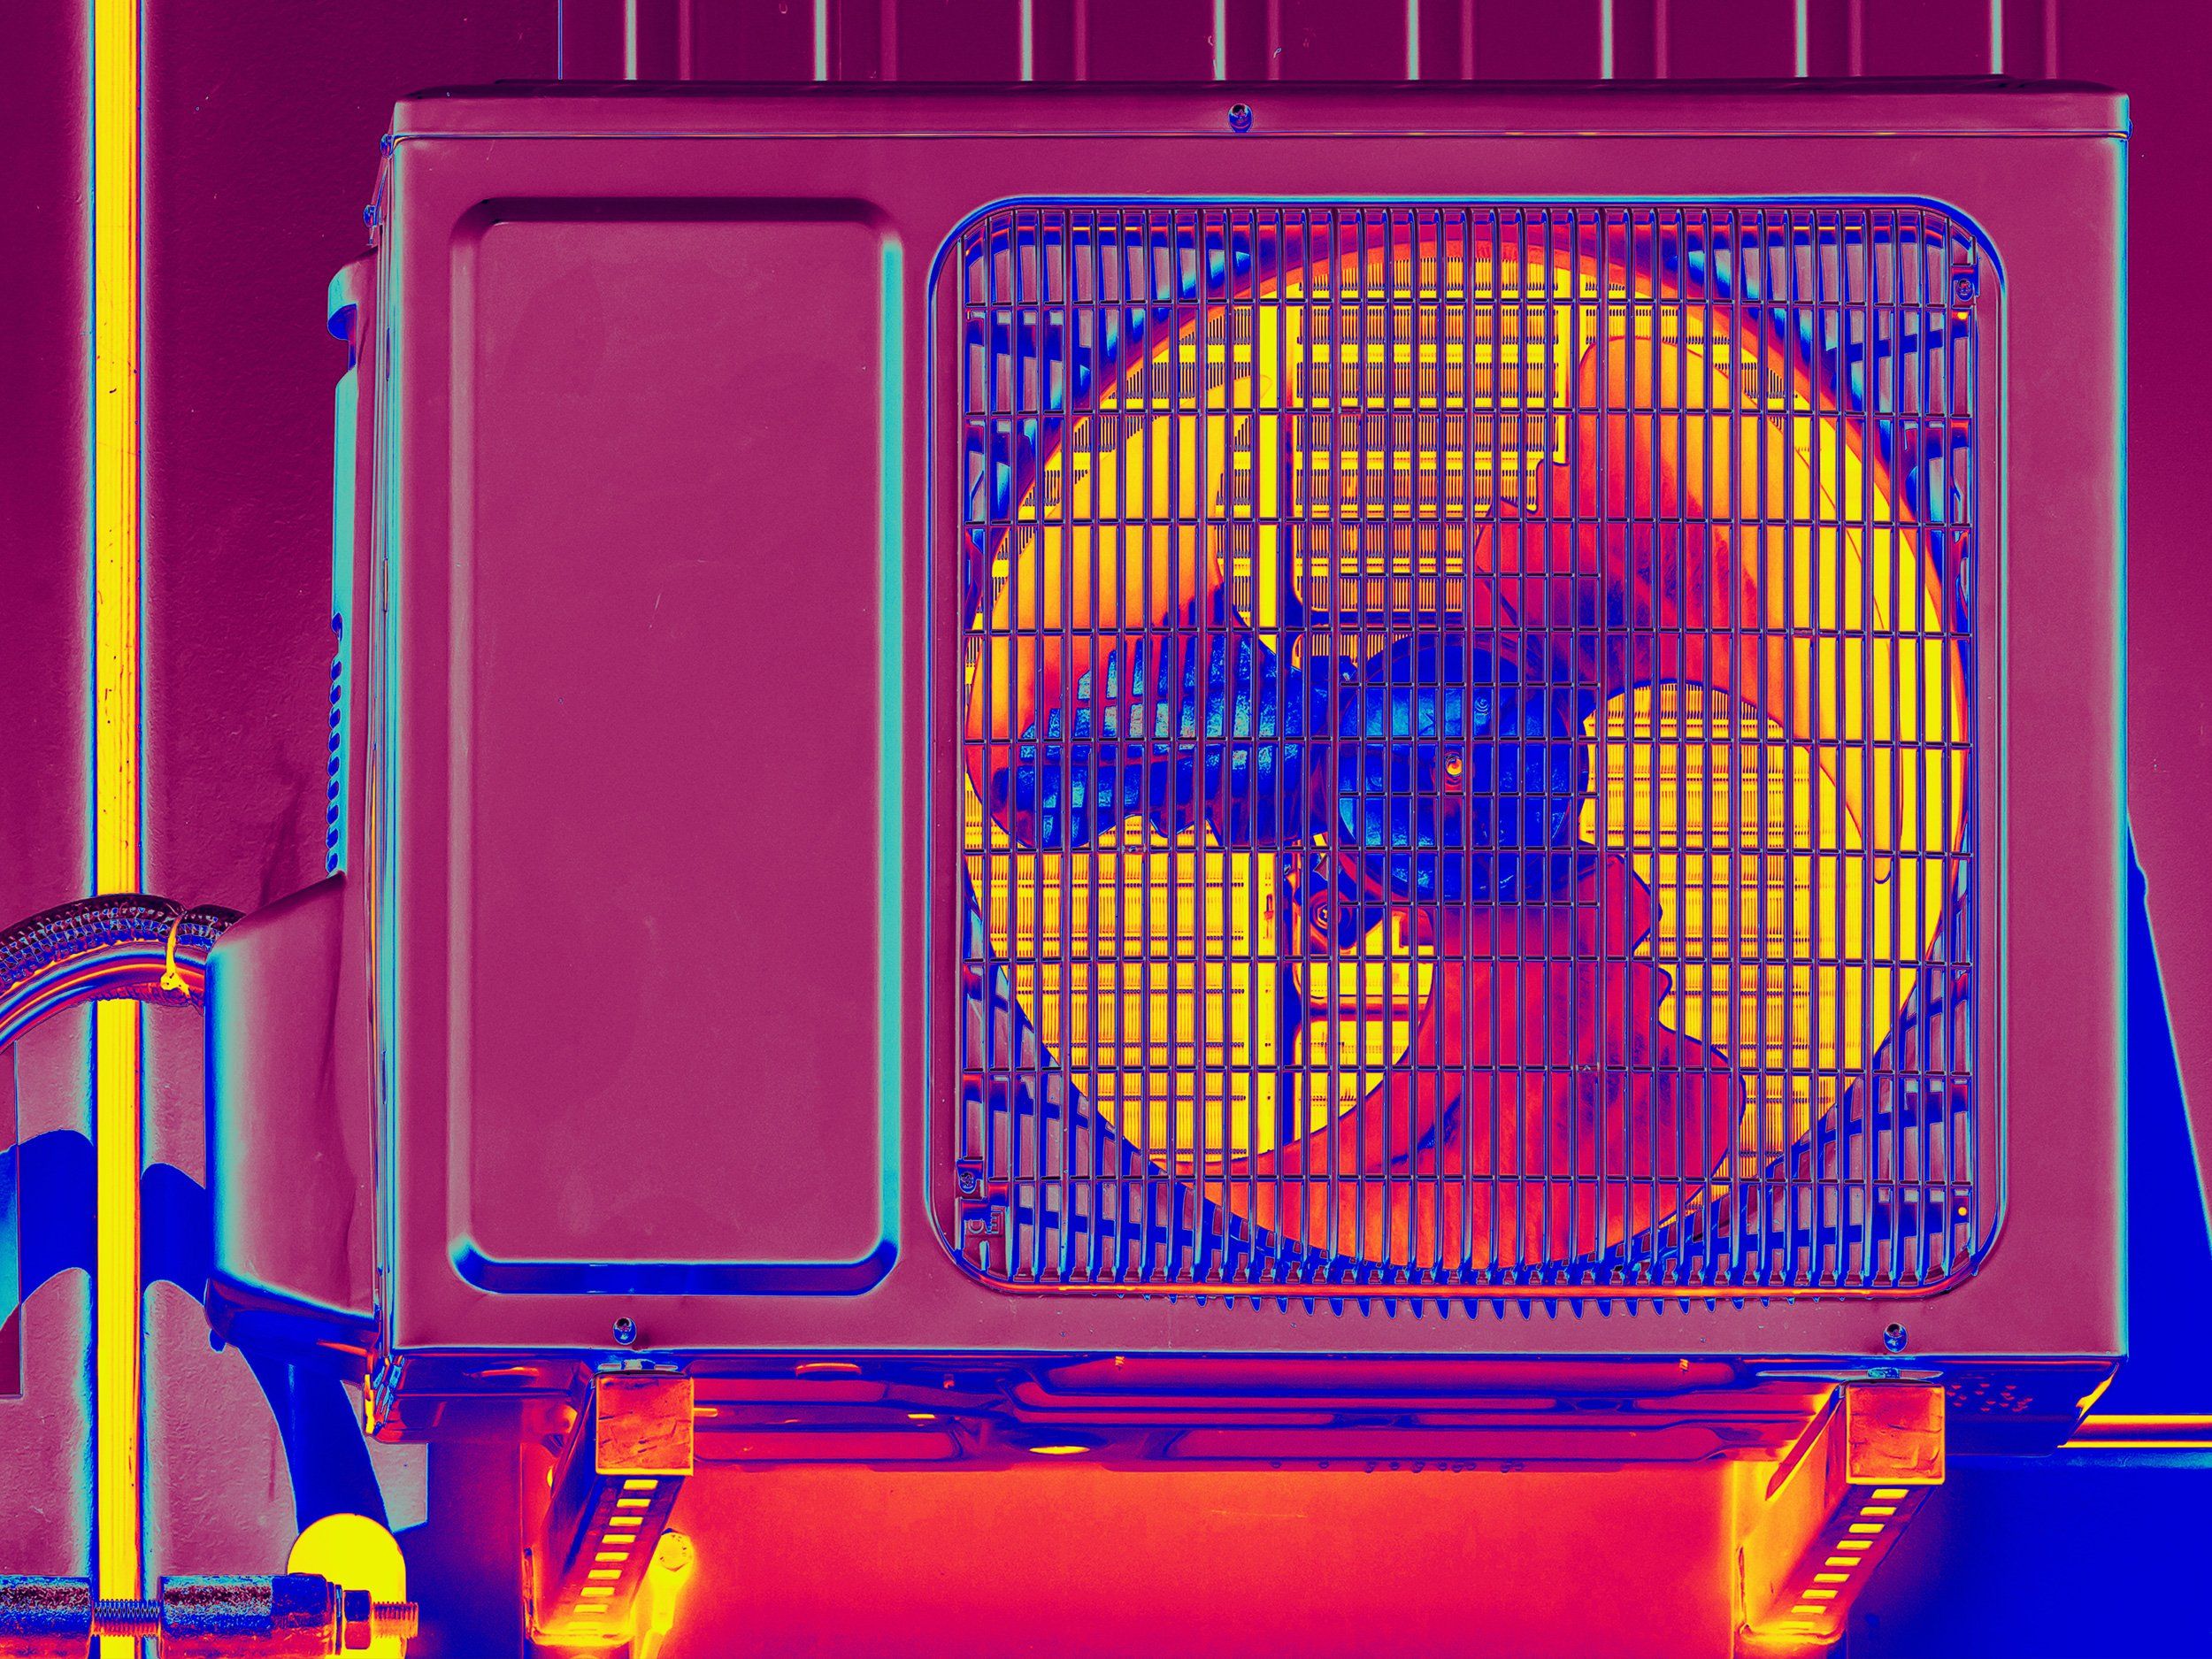 bright pink, blue and yellow image of a heat pump on a wall